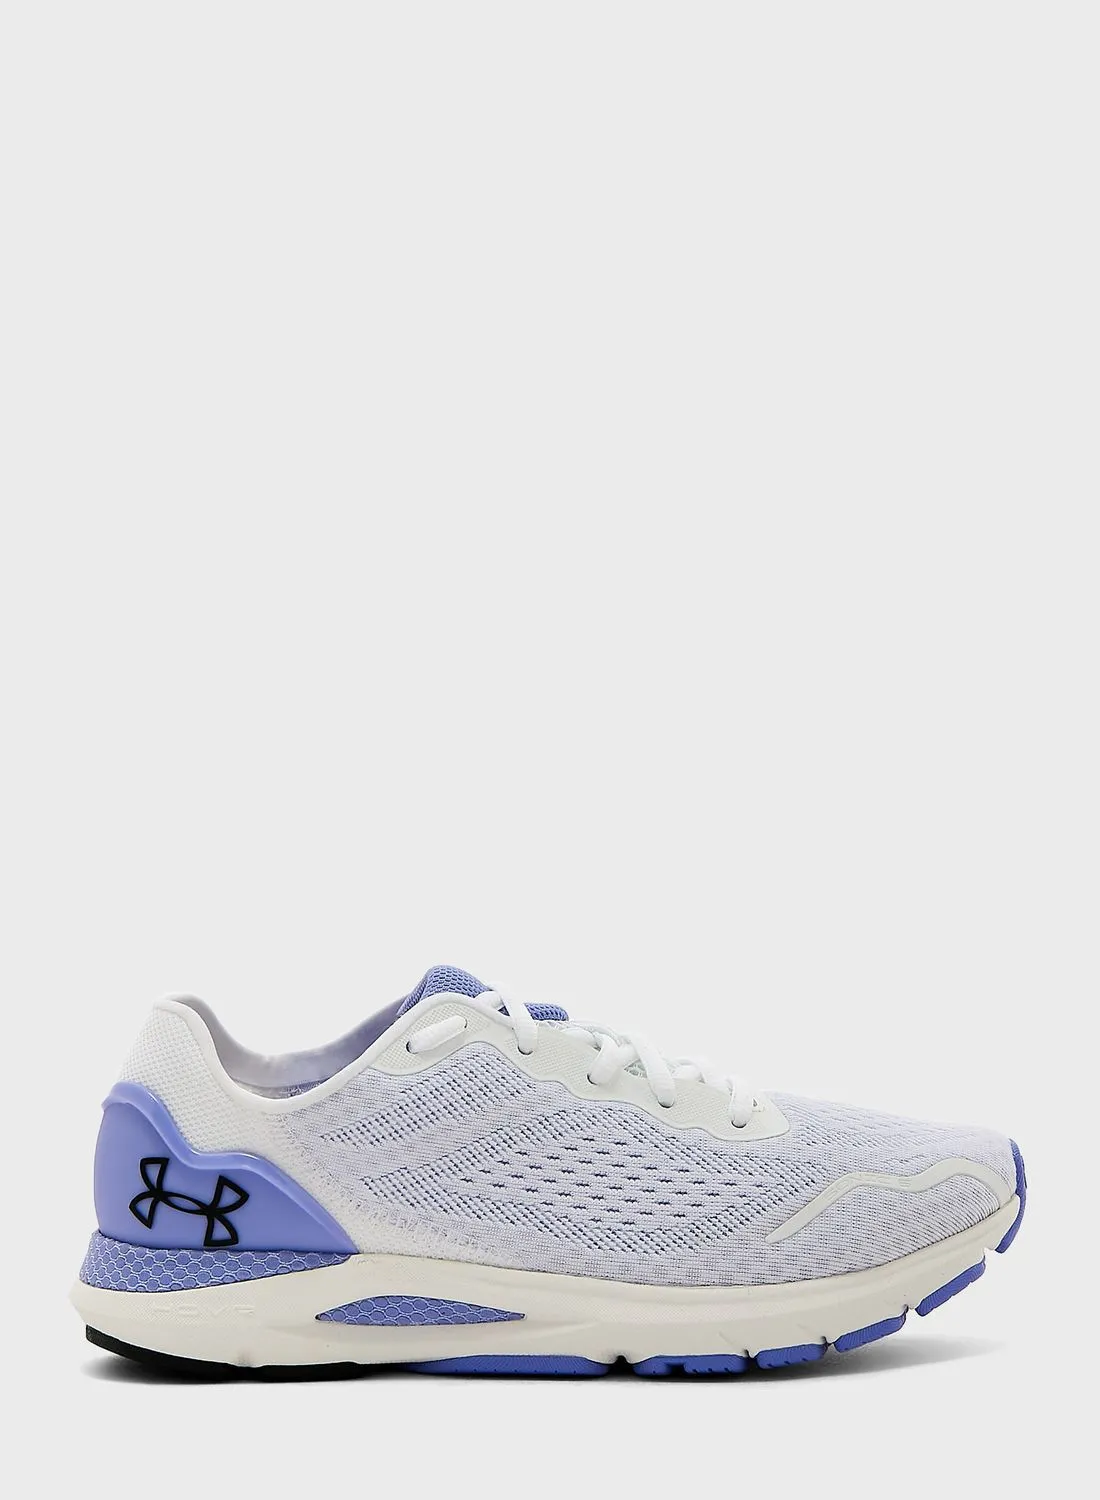 UNDER ARMOUR Hovr Sonic 6